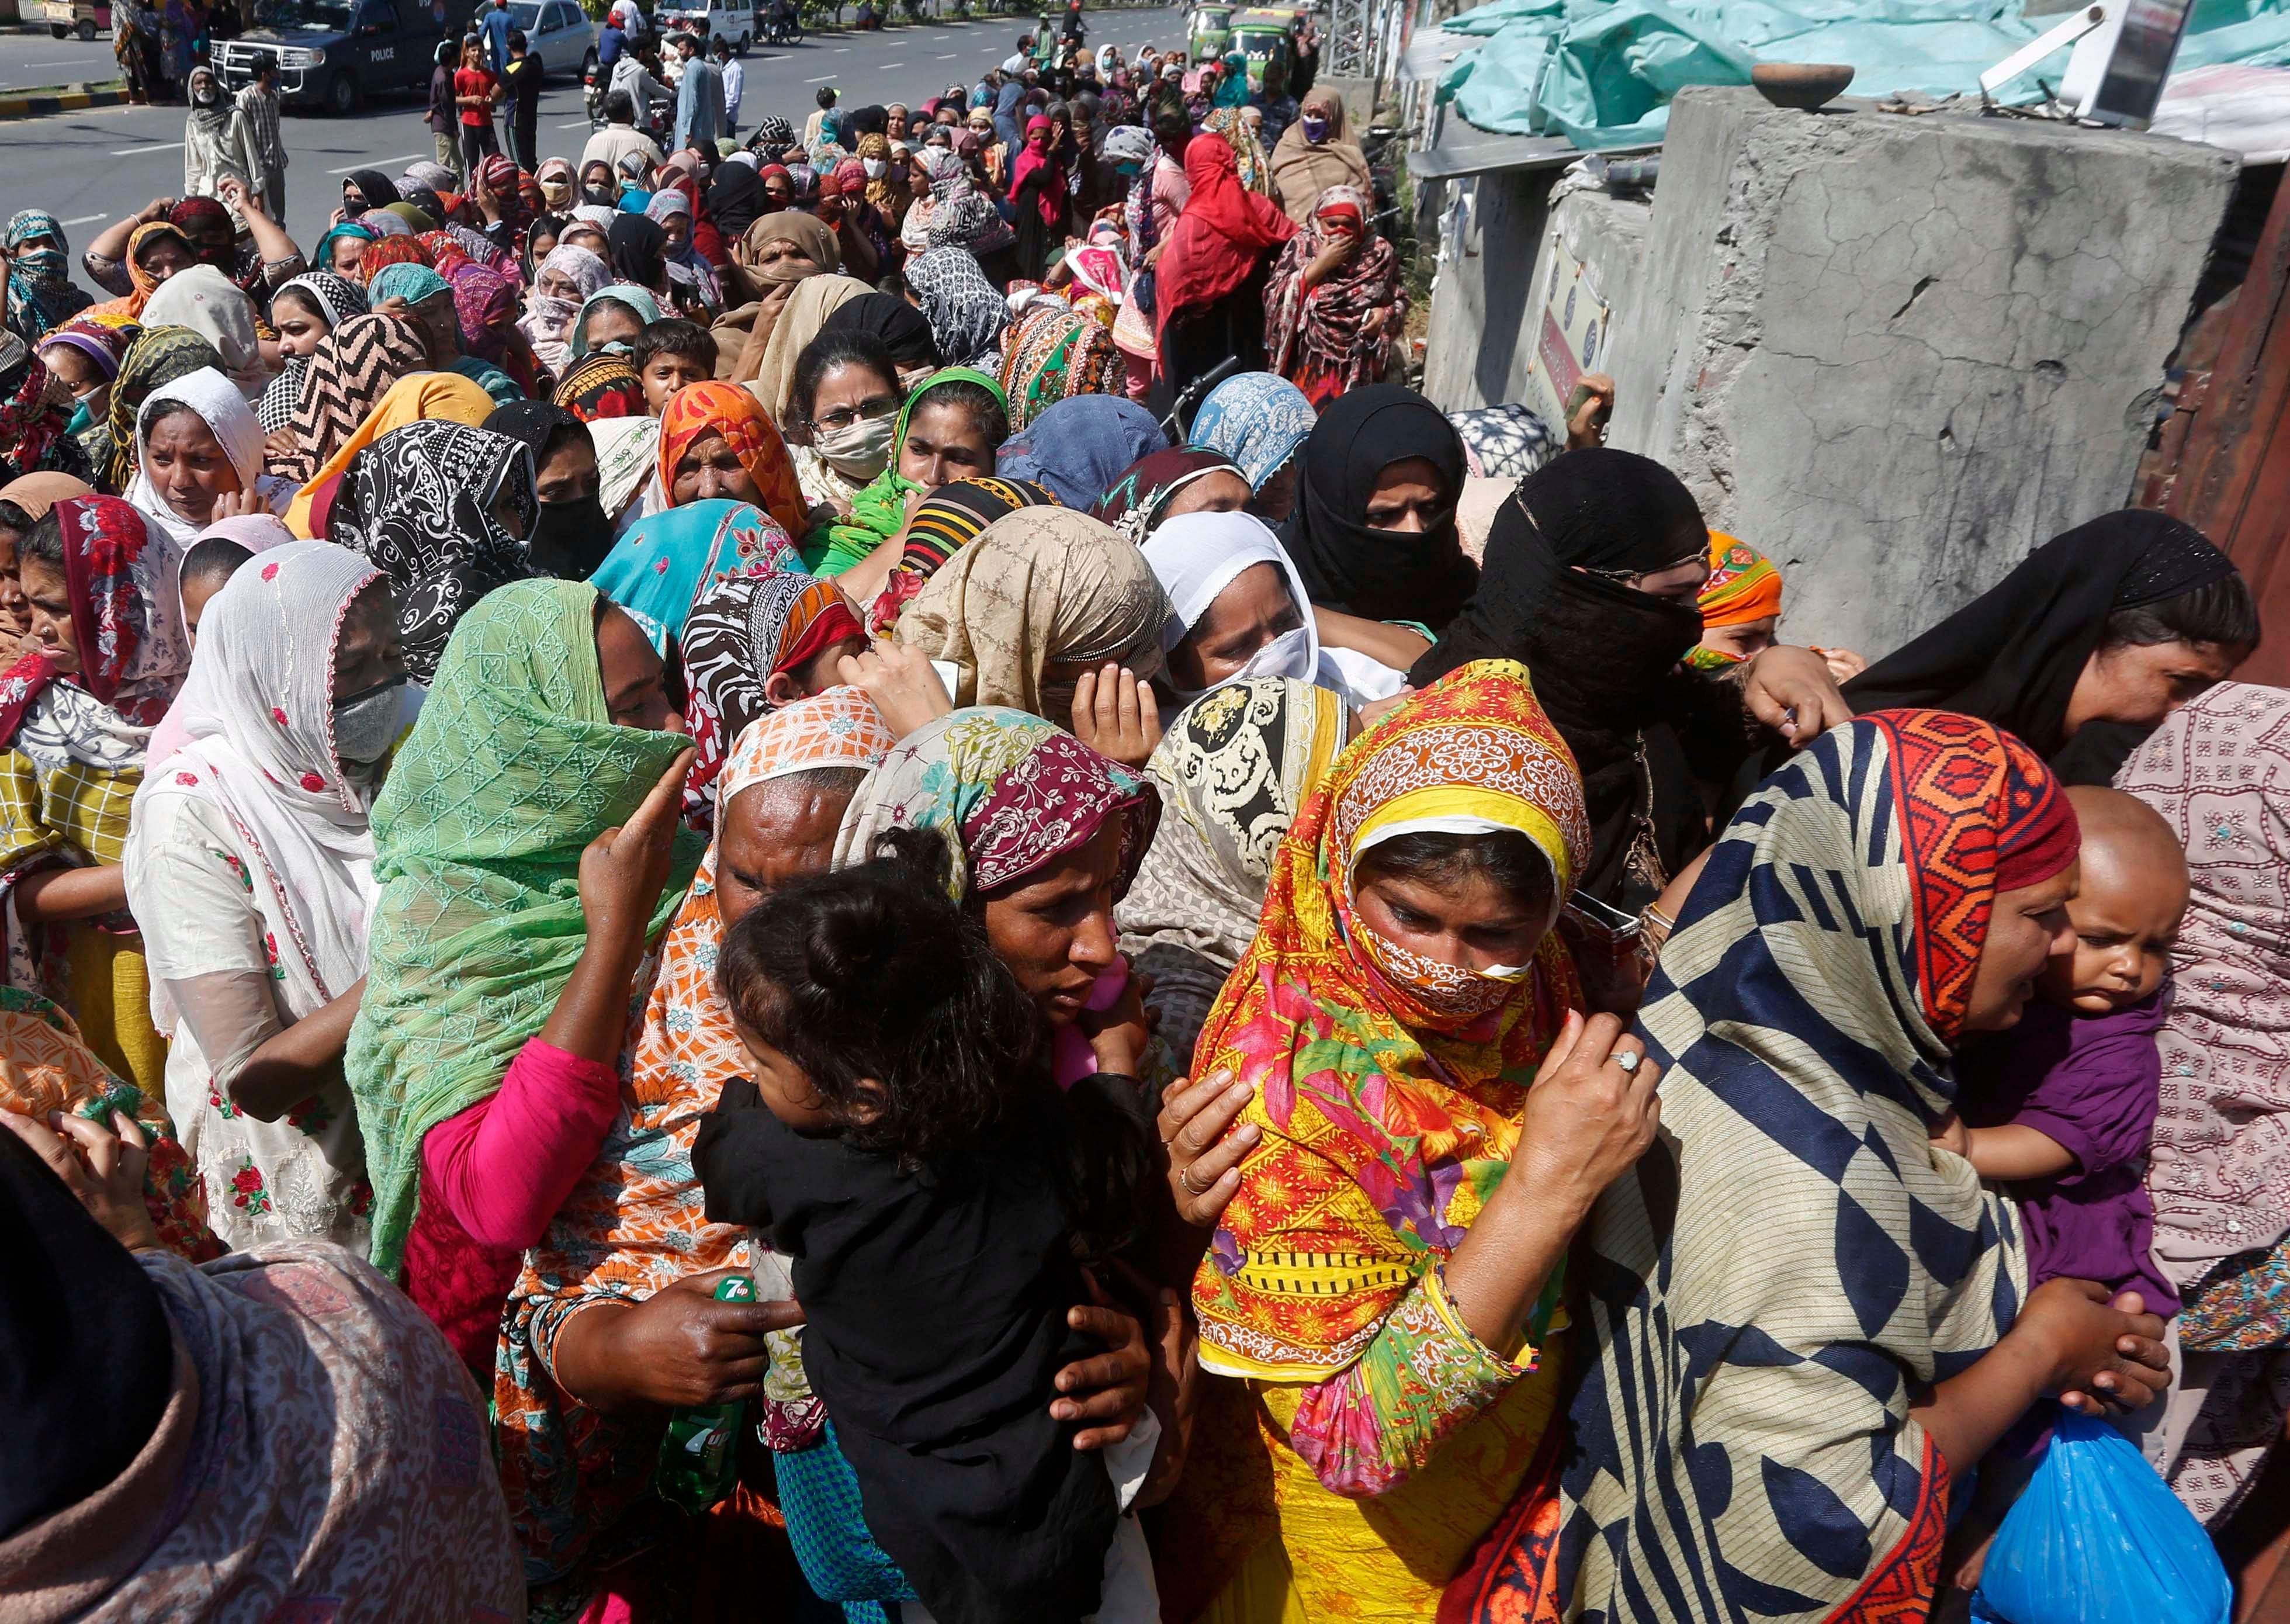 People wait to receive food assistance ahead of the Muslim fasting month of Ramadan, during a government-imposed nationwide lockdown to help contain the spread of the coronavirus. (AP Photo)